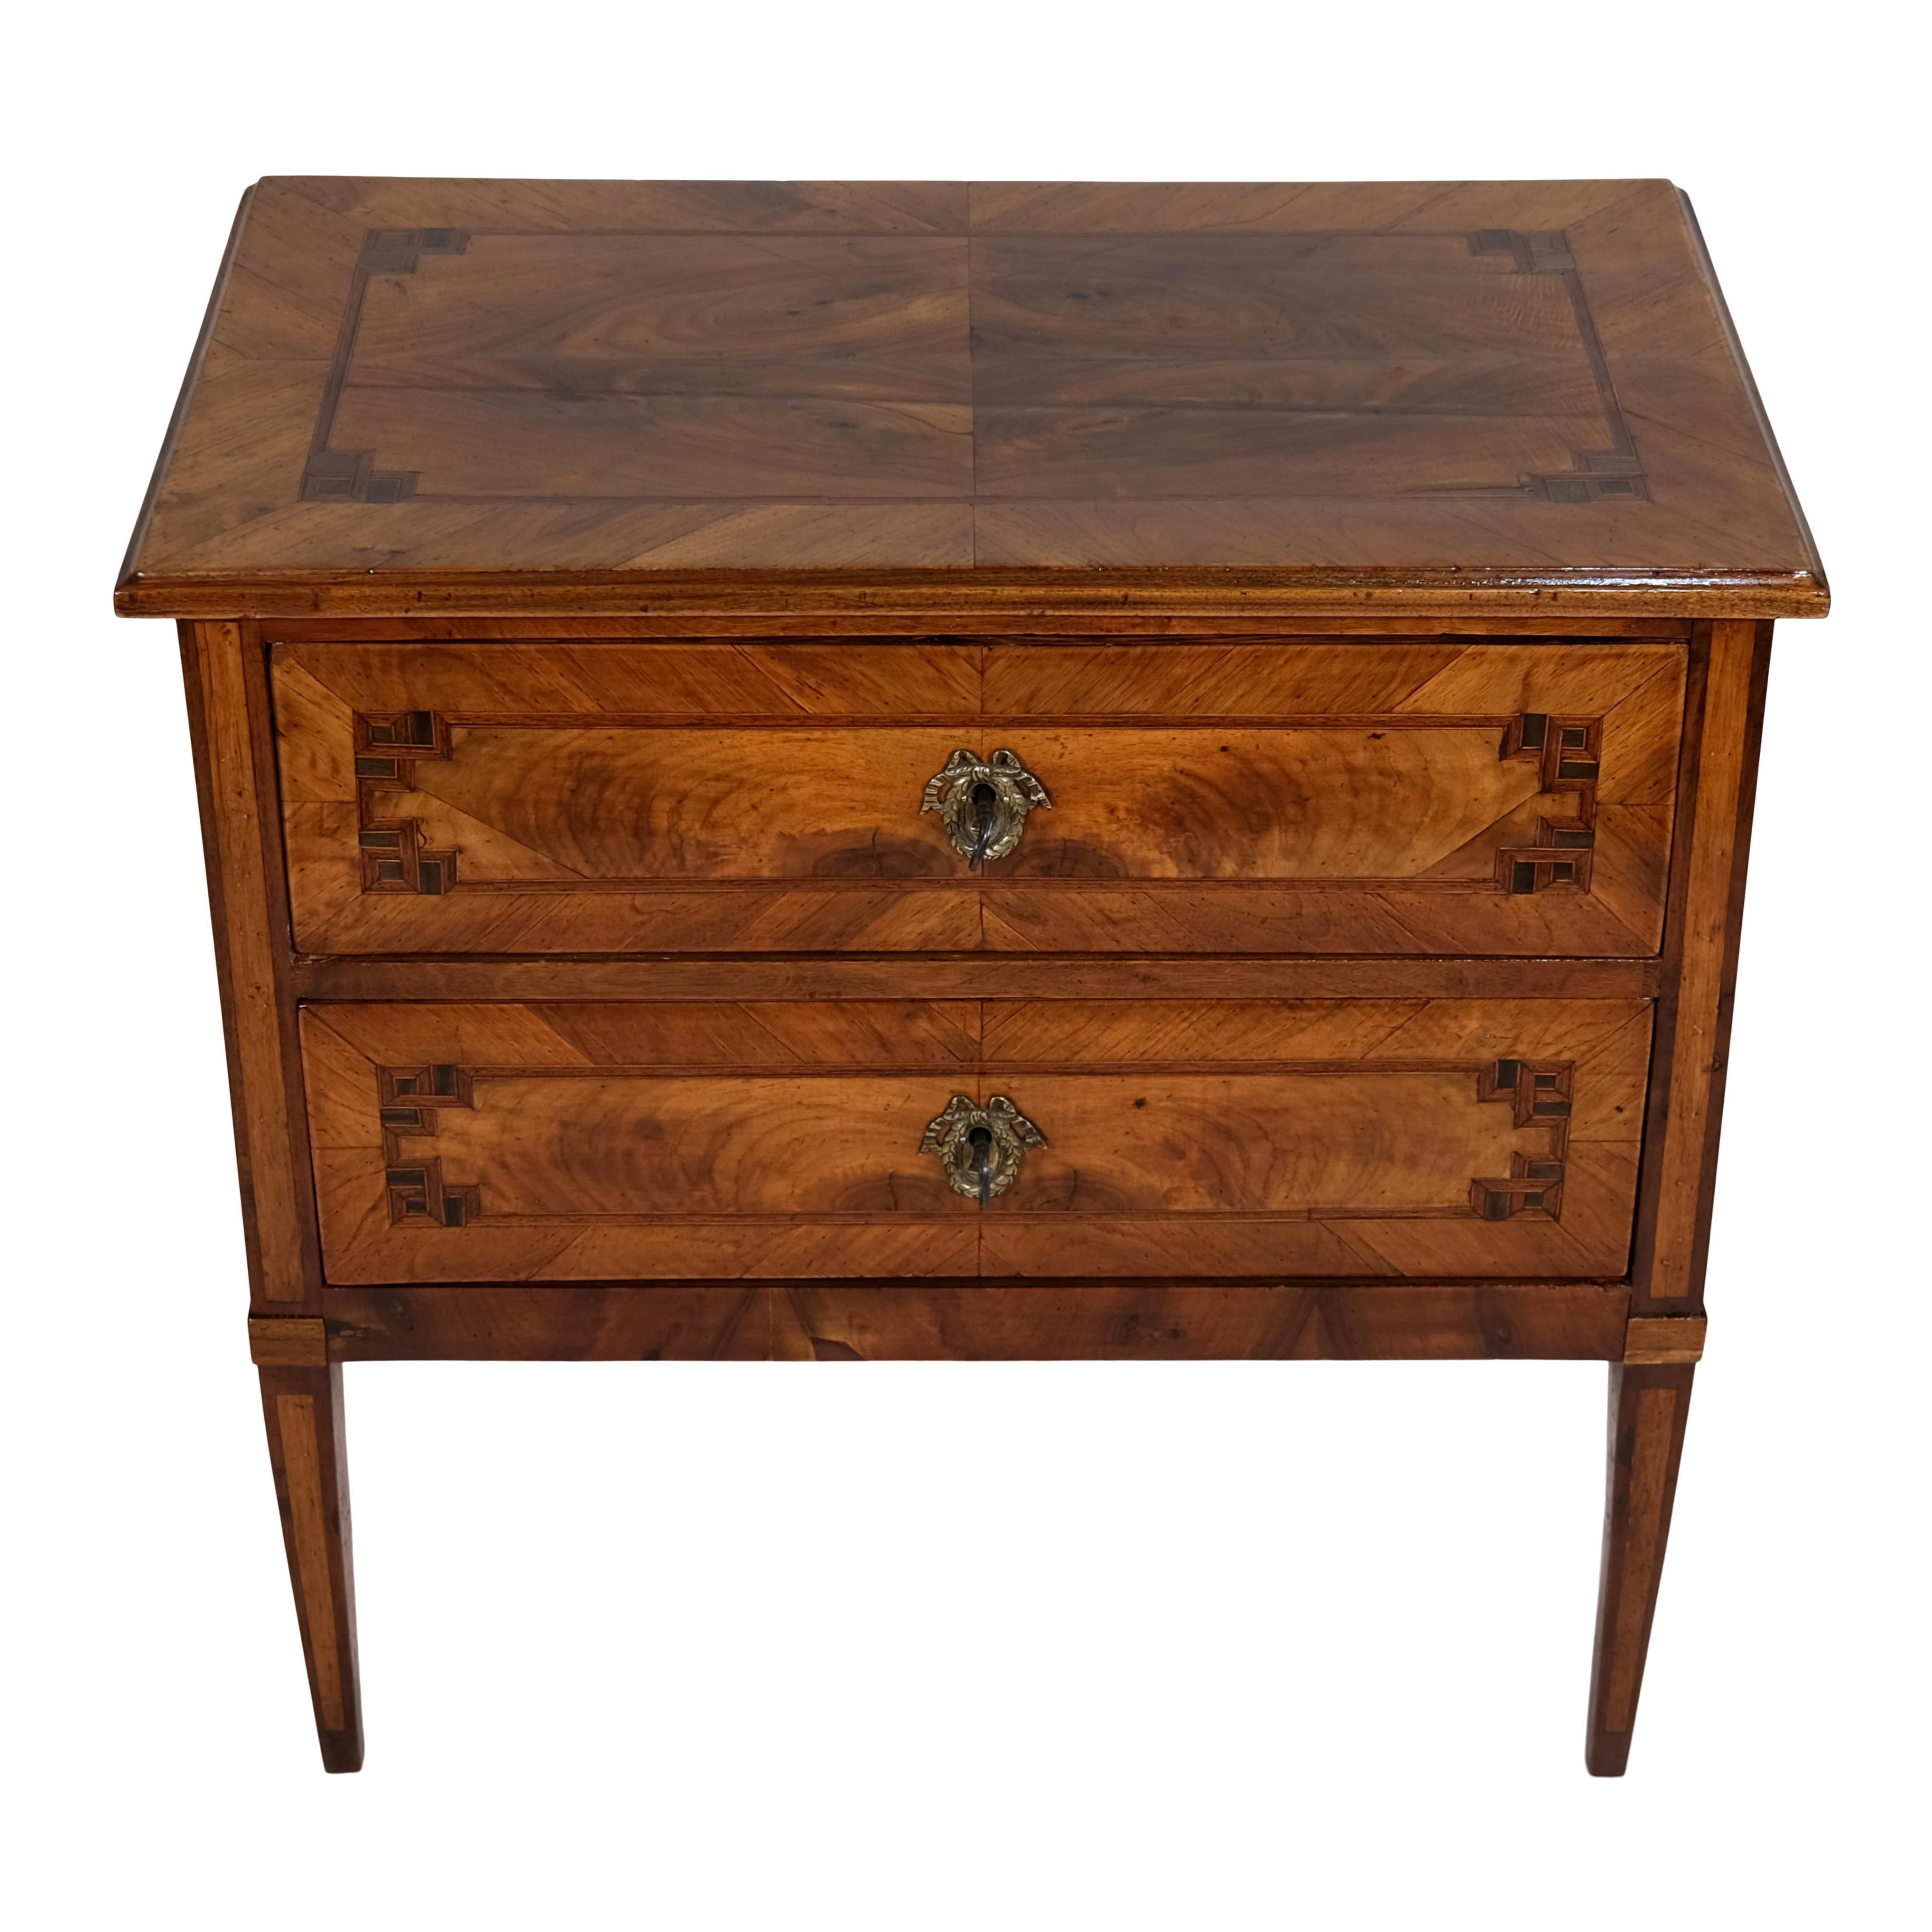 Louis XVI chest of drawers in nutwood
shellac hand polished

Original Louis XVI (also: Louis-seize), France around 1780

Dimensions:
Width: 77 cm
Height: 77 cm
Depth: 43 cm.